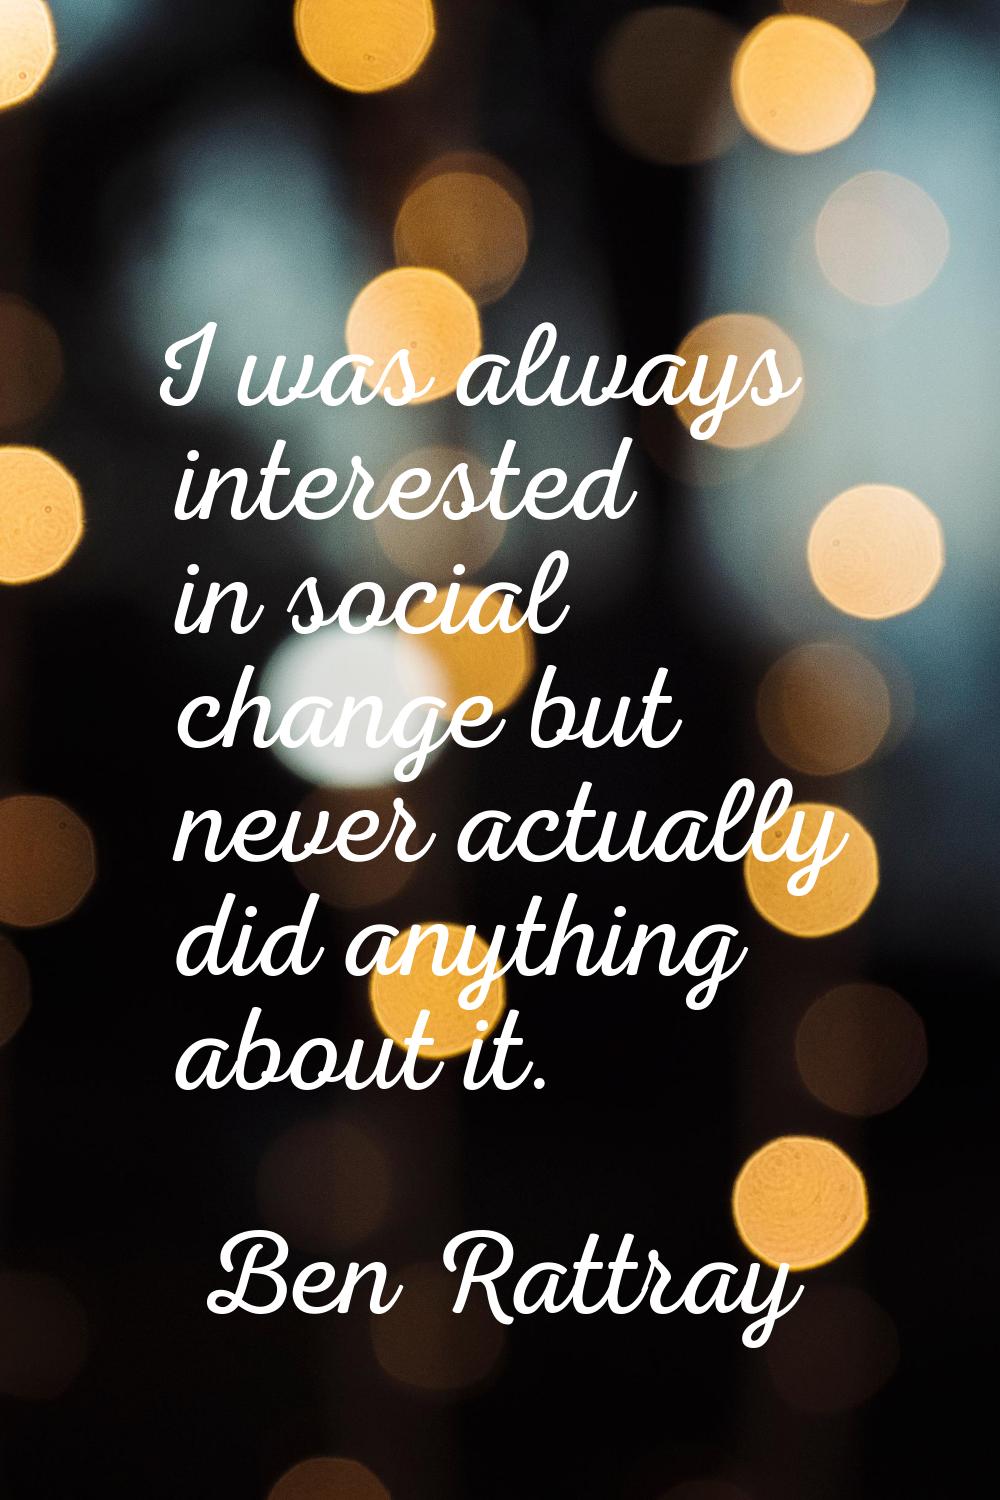 I was always interested in social change but never actually did anything about it.